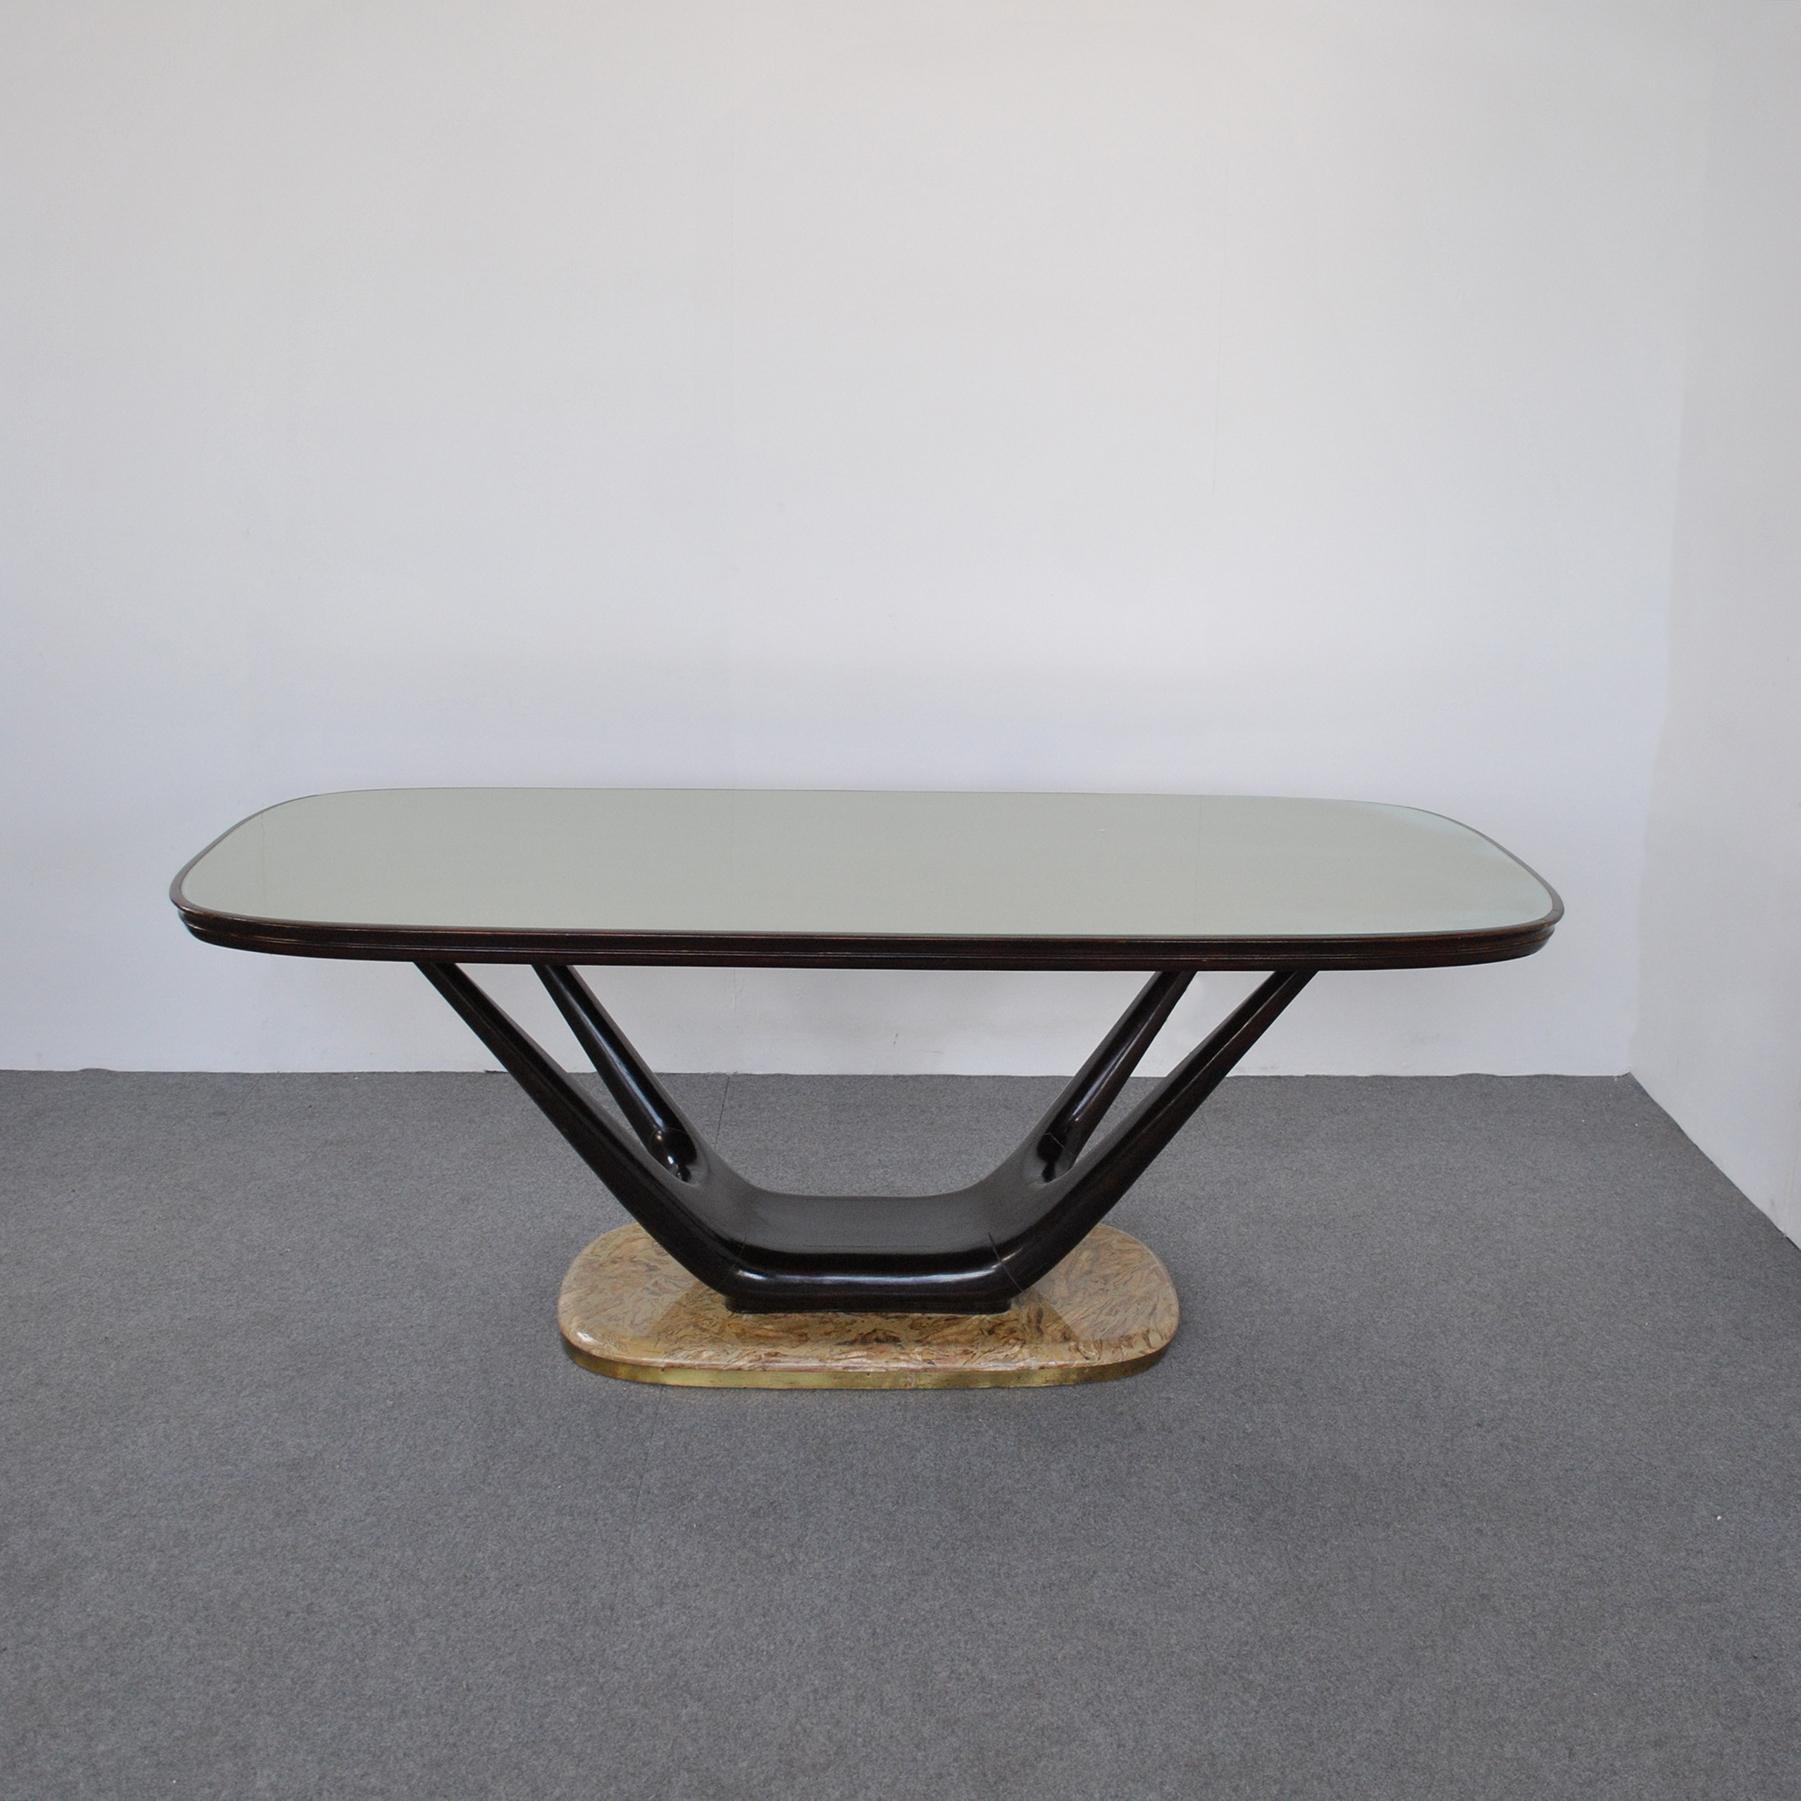 Fratelli Turri Milano project Vittorio Dassi (Milan, 1893-1973), around the 1960s. Mid-century dining table in lacquered rosewood and marble, the rectangular top with rounded edges inlaid with white marble and supported by sculptural wooden armrests